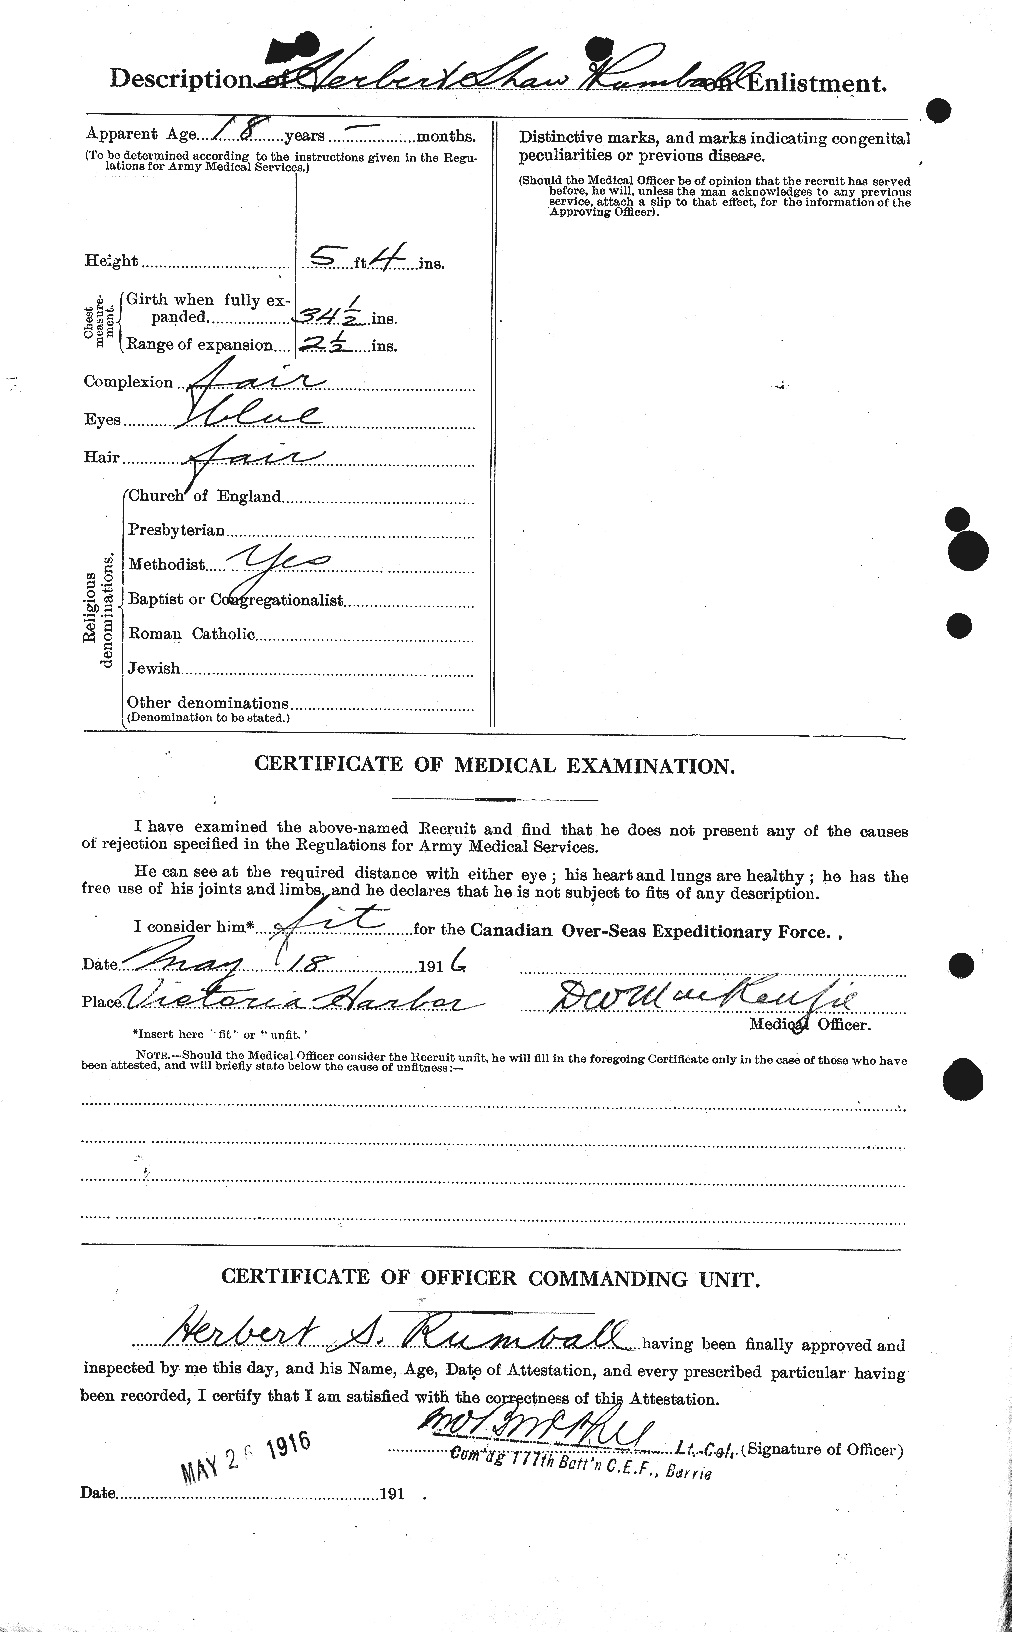 Personnel Records of the First World War - CEF 617356b